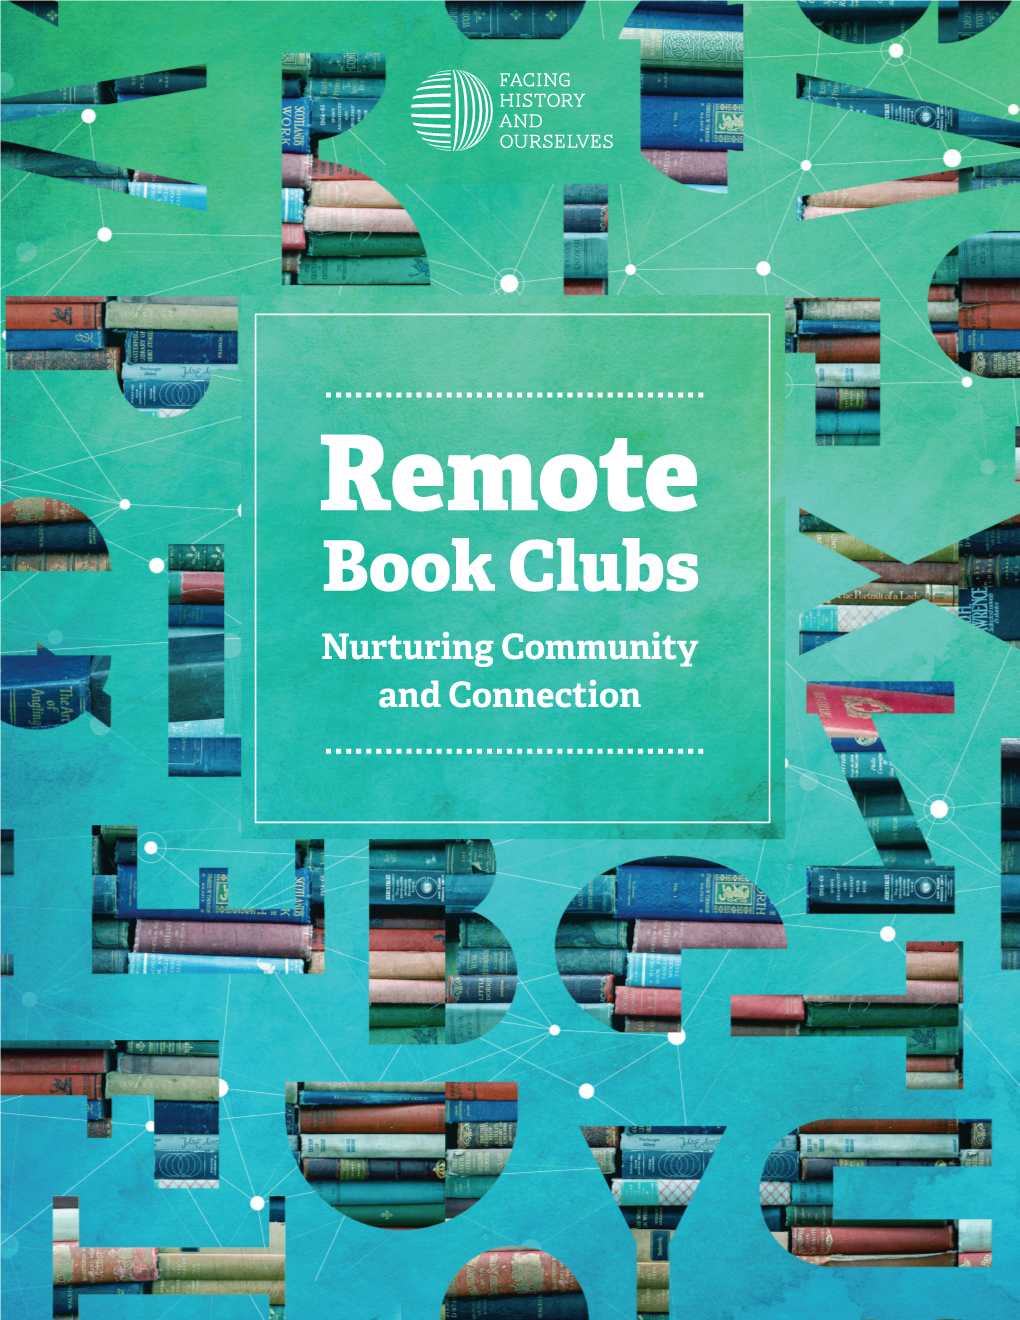 Remote Book Clubs Nurturing Community and Connection